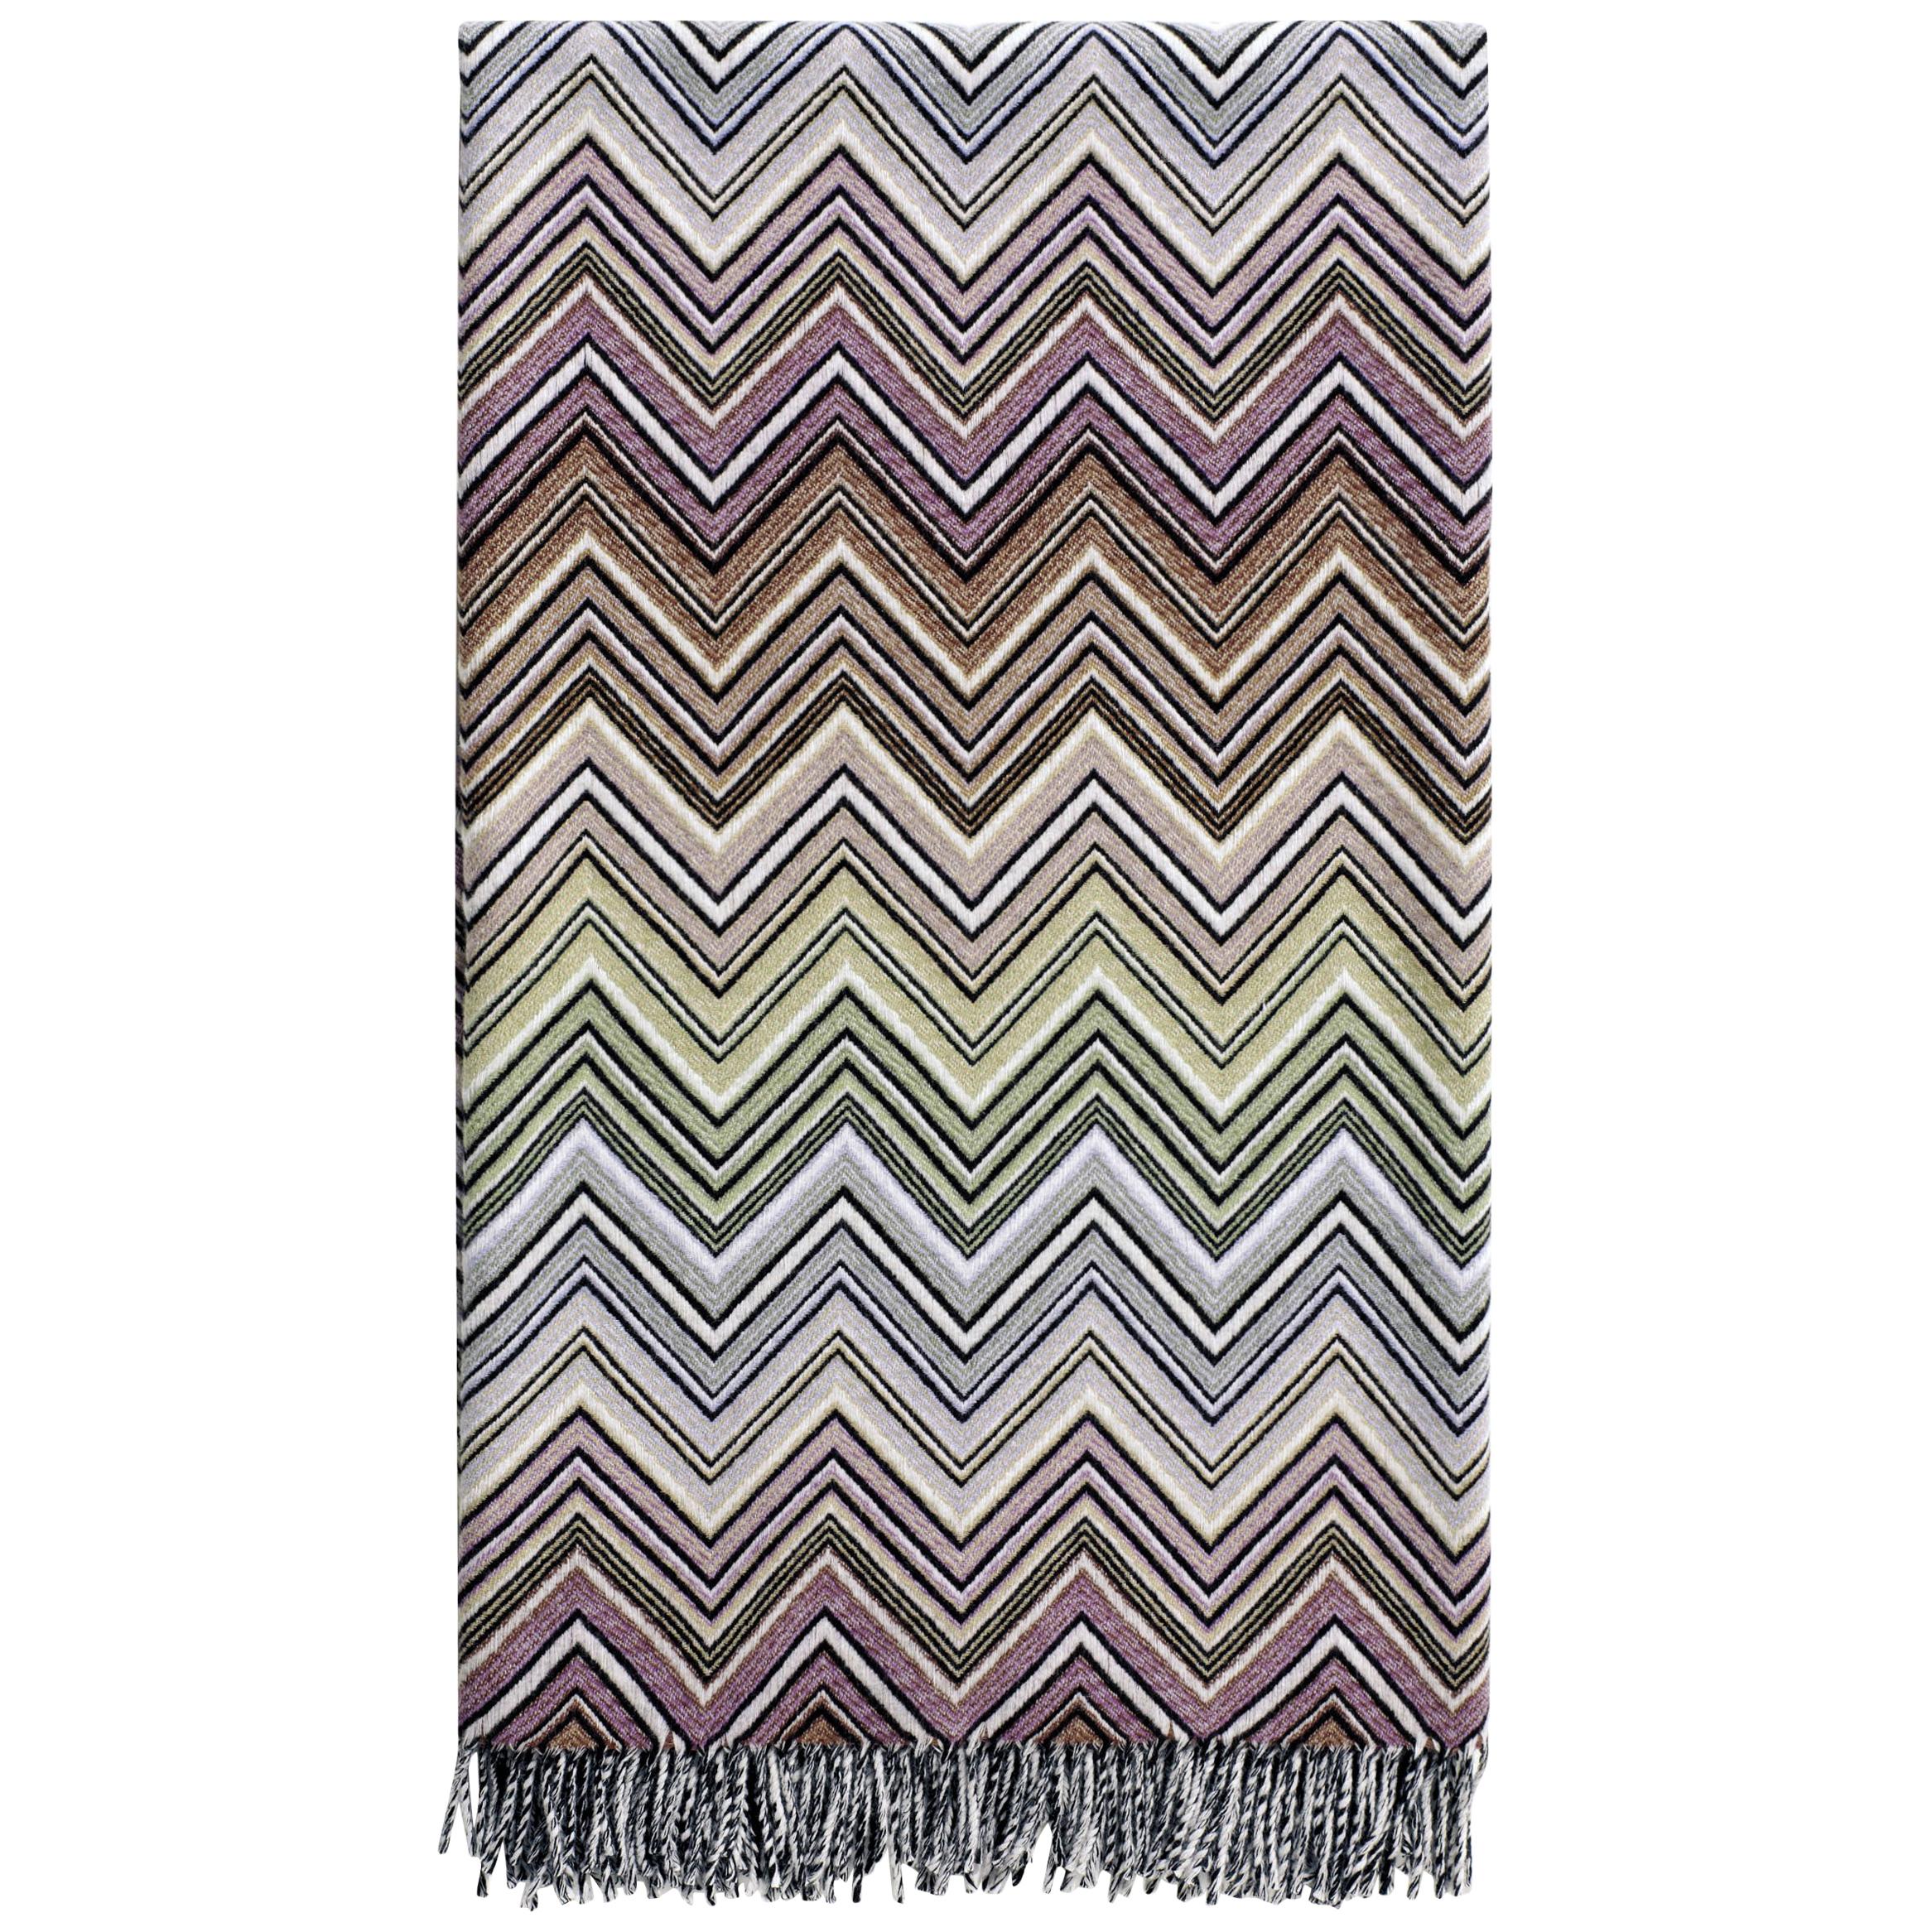 Missoni Home Perseo Throw in Multicolor Chevron Print with Black Fringe Trim For Sale